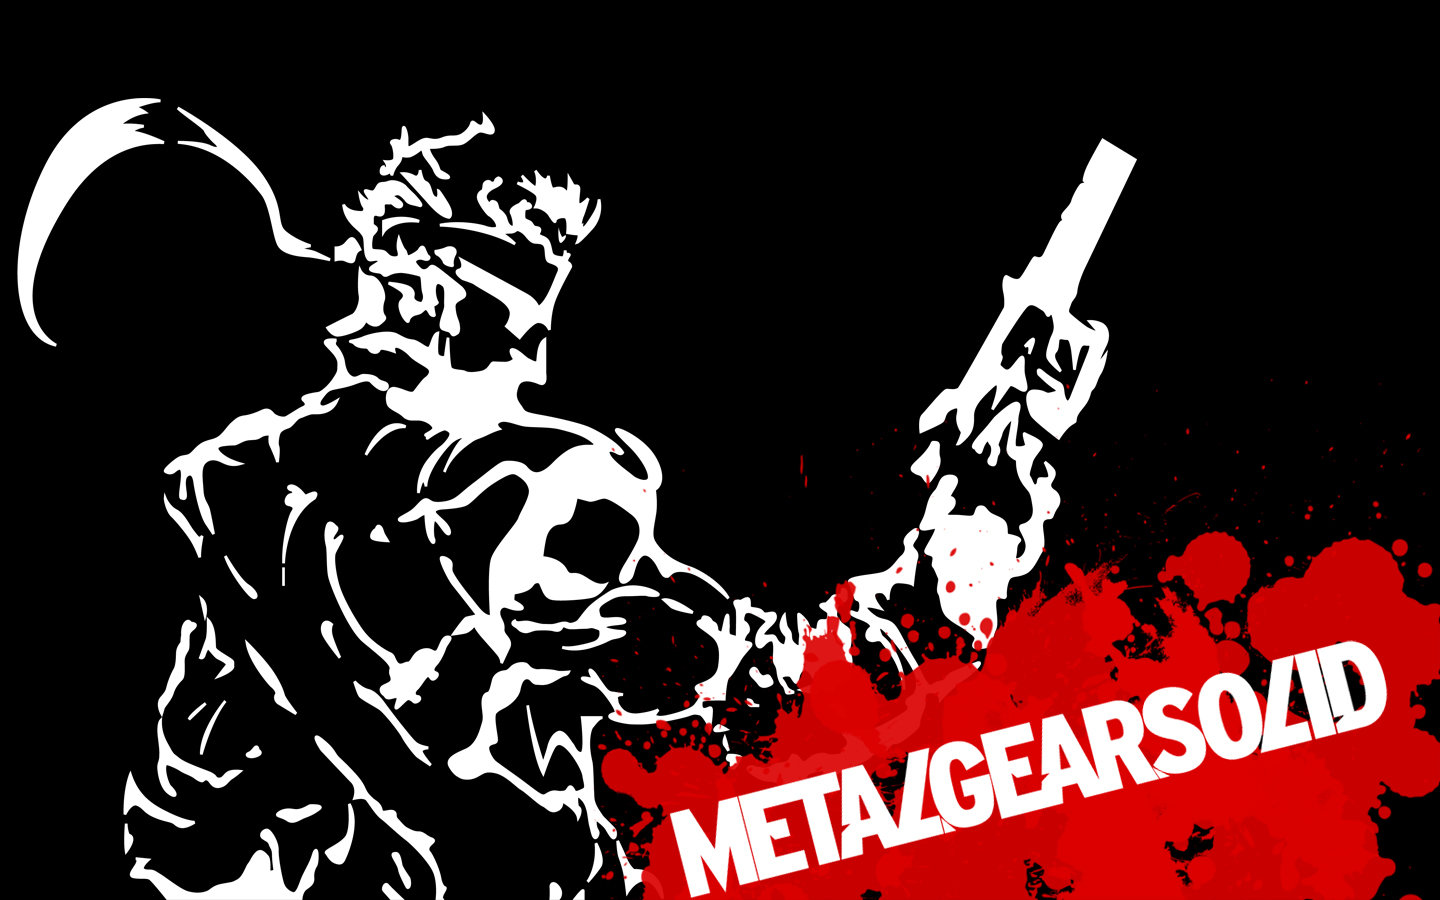 Awesome Metal Gear Solid (MGS) free wallpaper ID:121088 for hd 1440x900 desktop